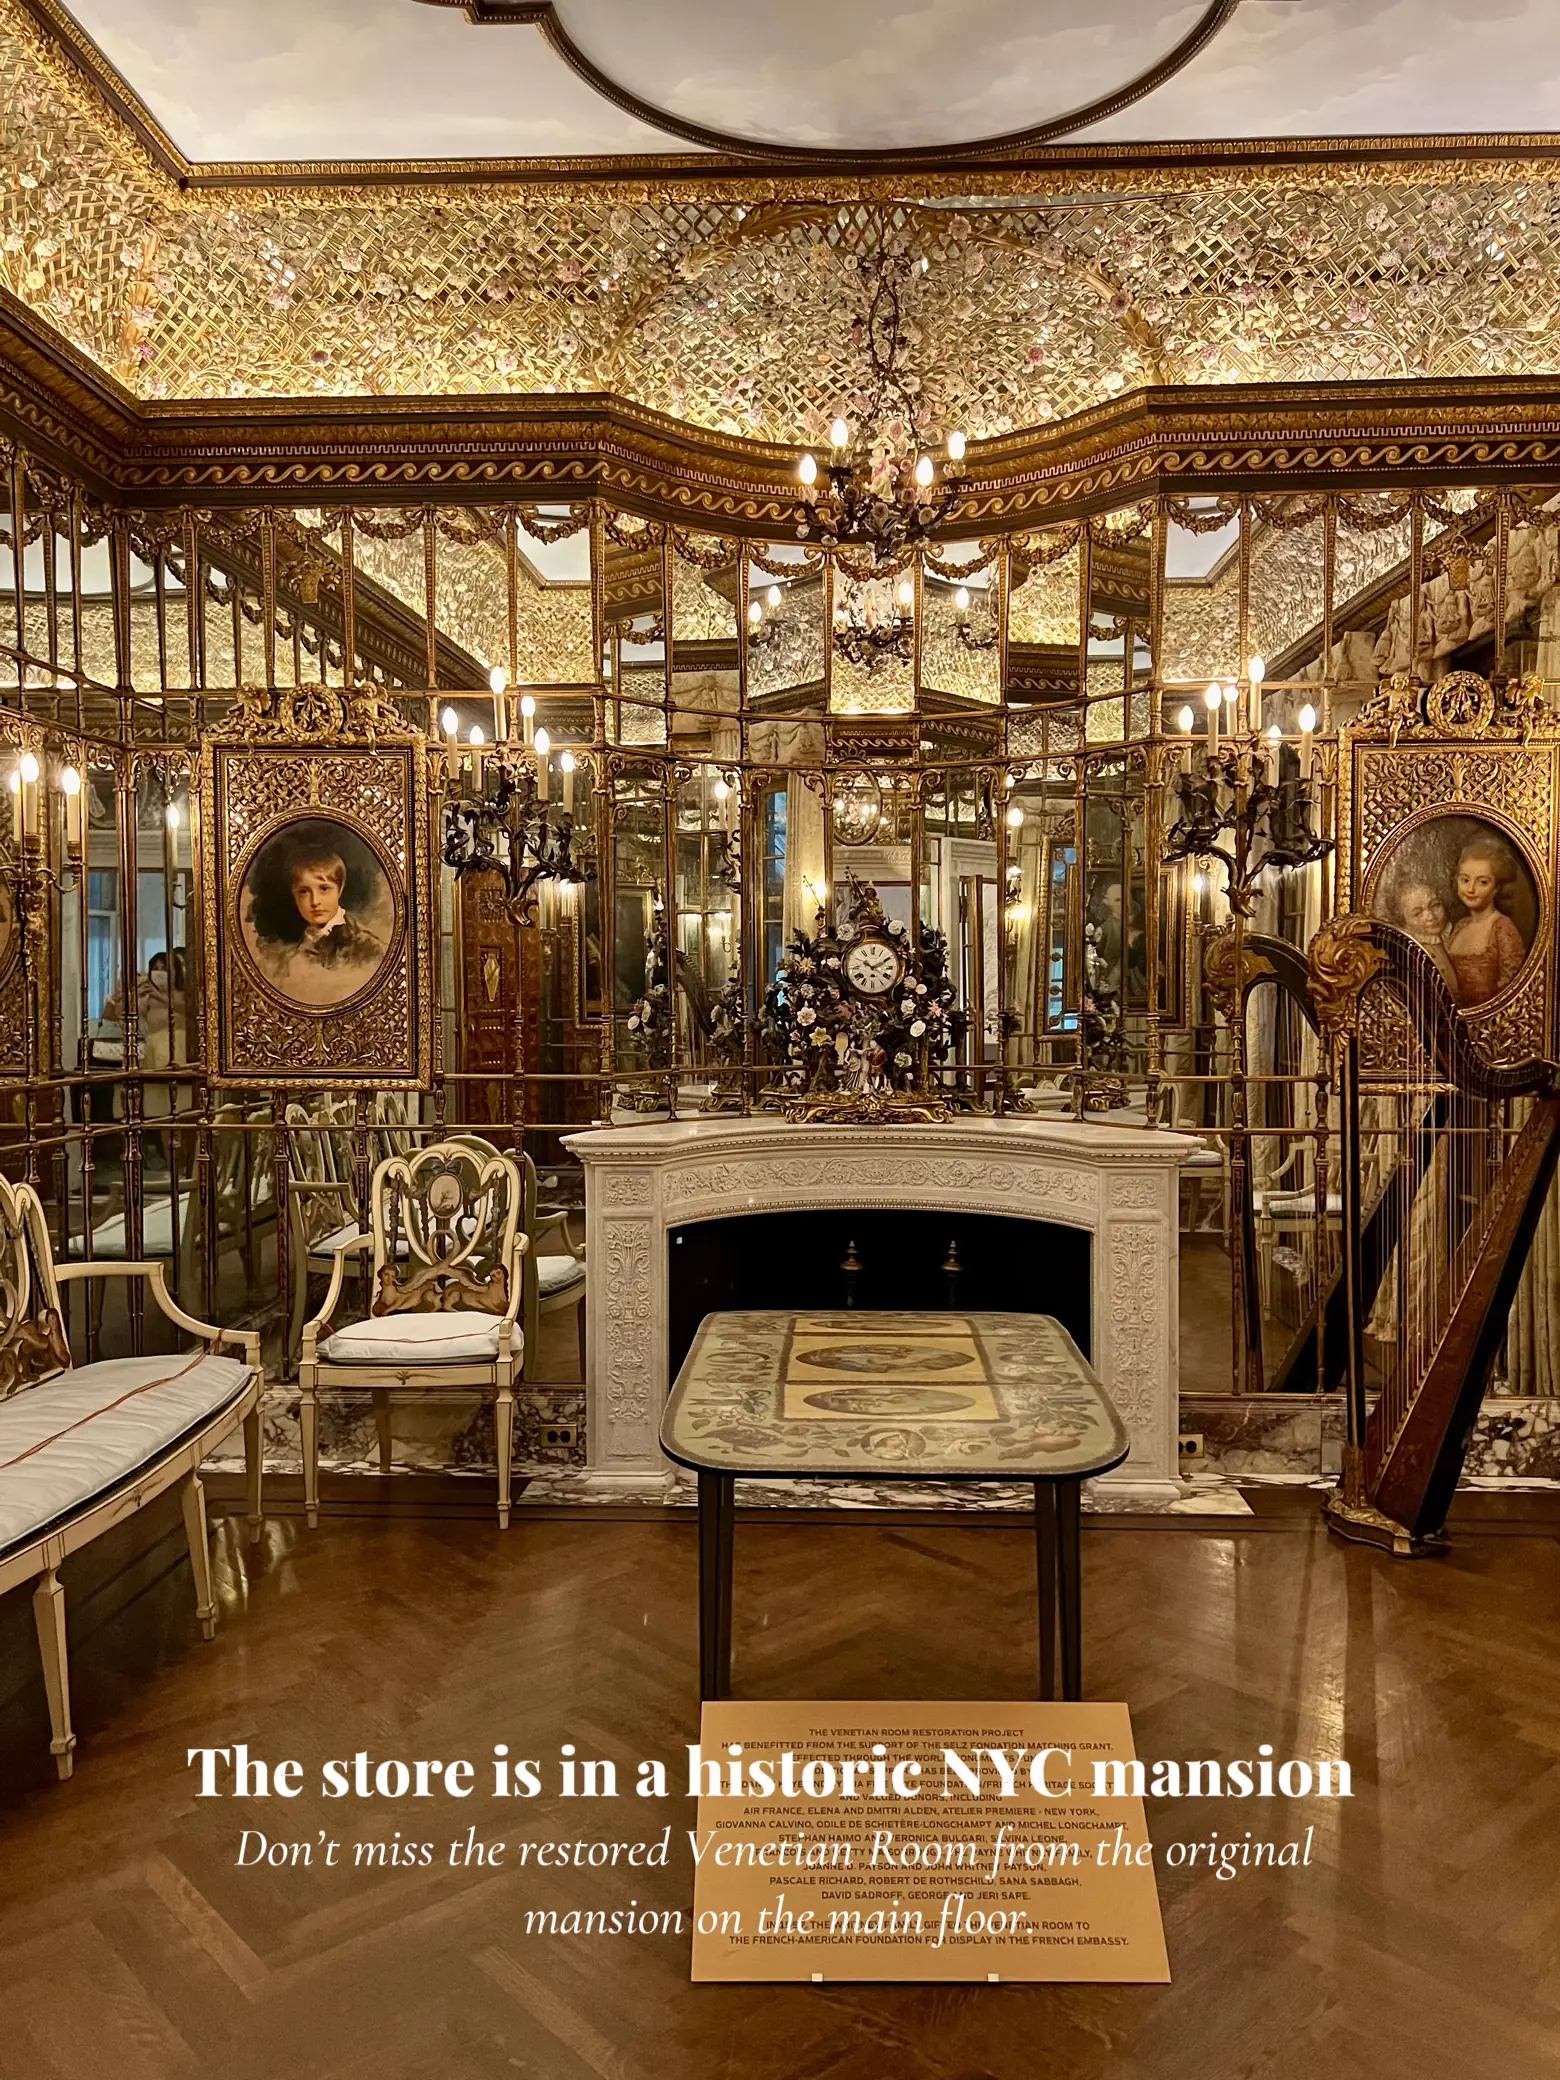  The store is in a historic New York City mansion.